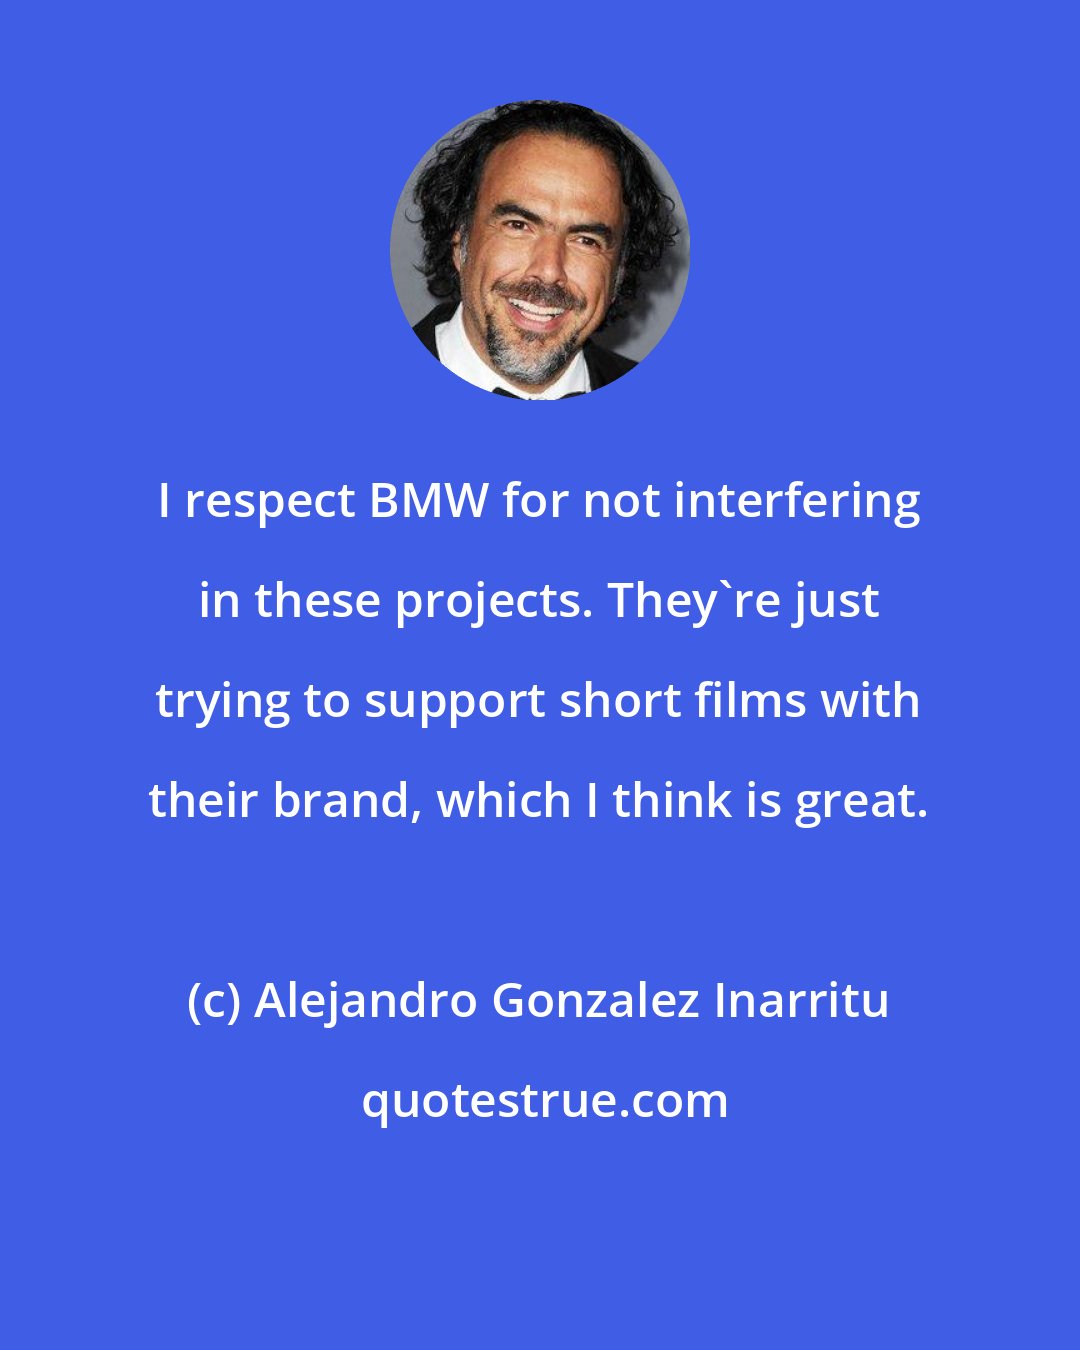 Alejandro Gonzalez Inarritu: I respect BMW for not interfering in these projects. They're just trying to support short films with their brand, which I think is great.